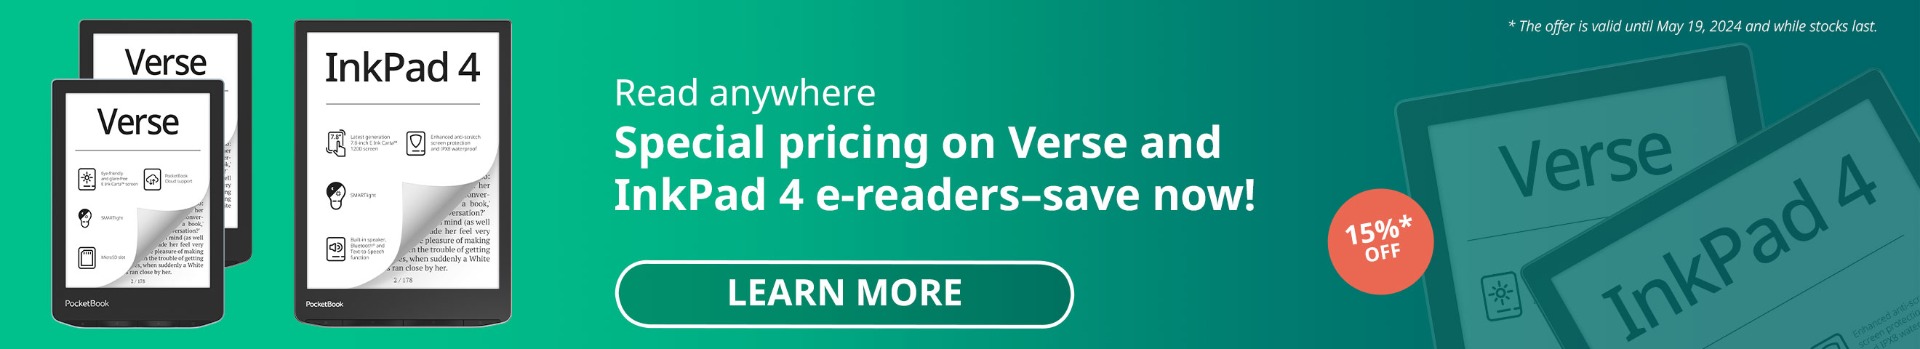 Read Anywhere: Save 15% on Verse and InkPad 4 E-Readers